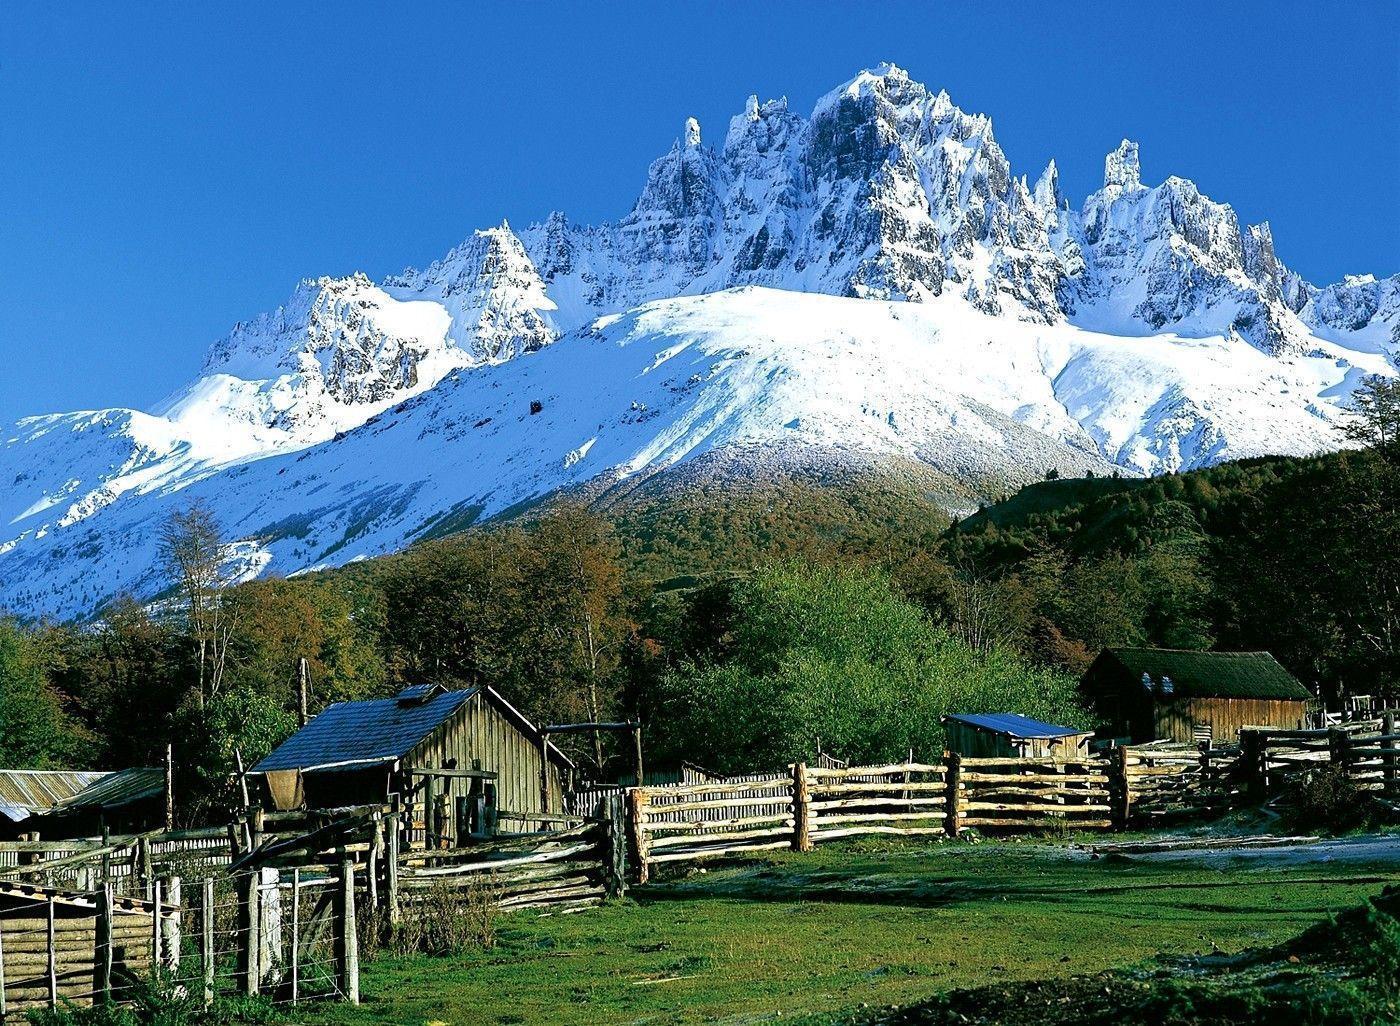 Dwelling in the mountains of Patagonia wallpaper and image